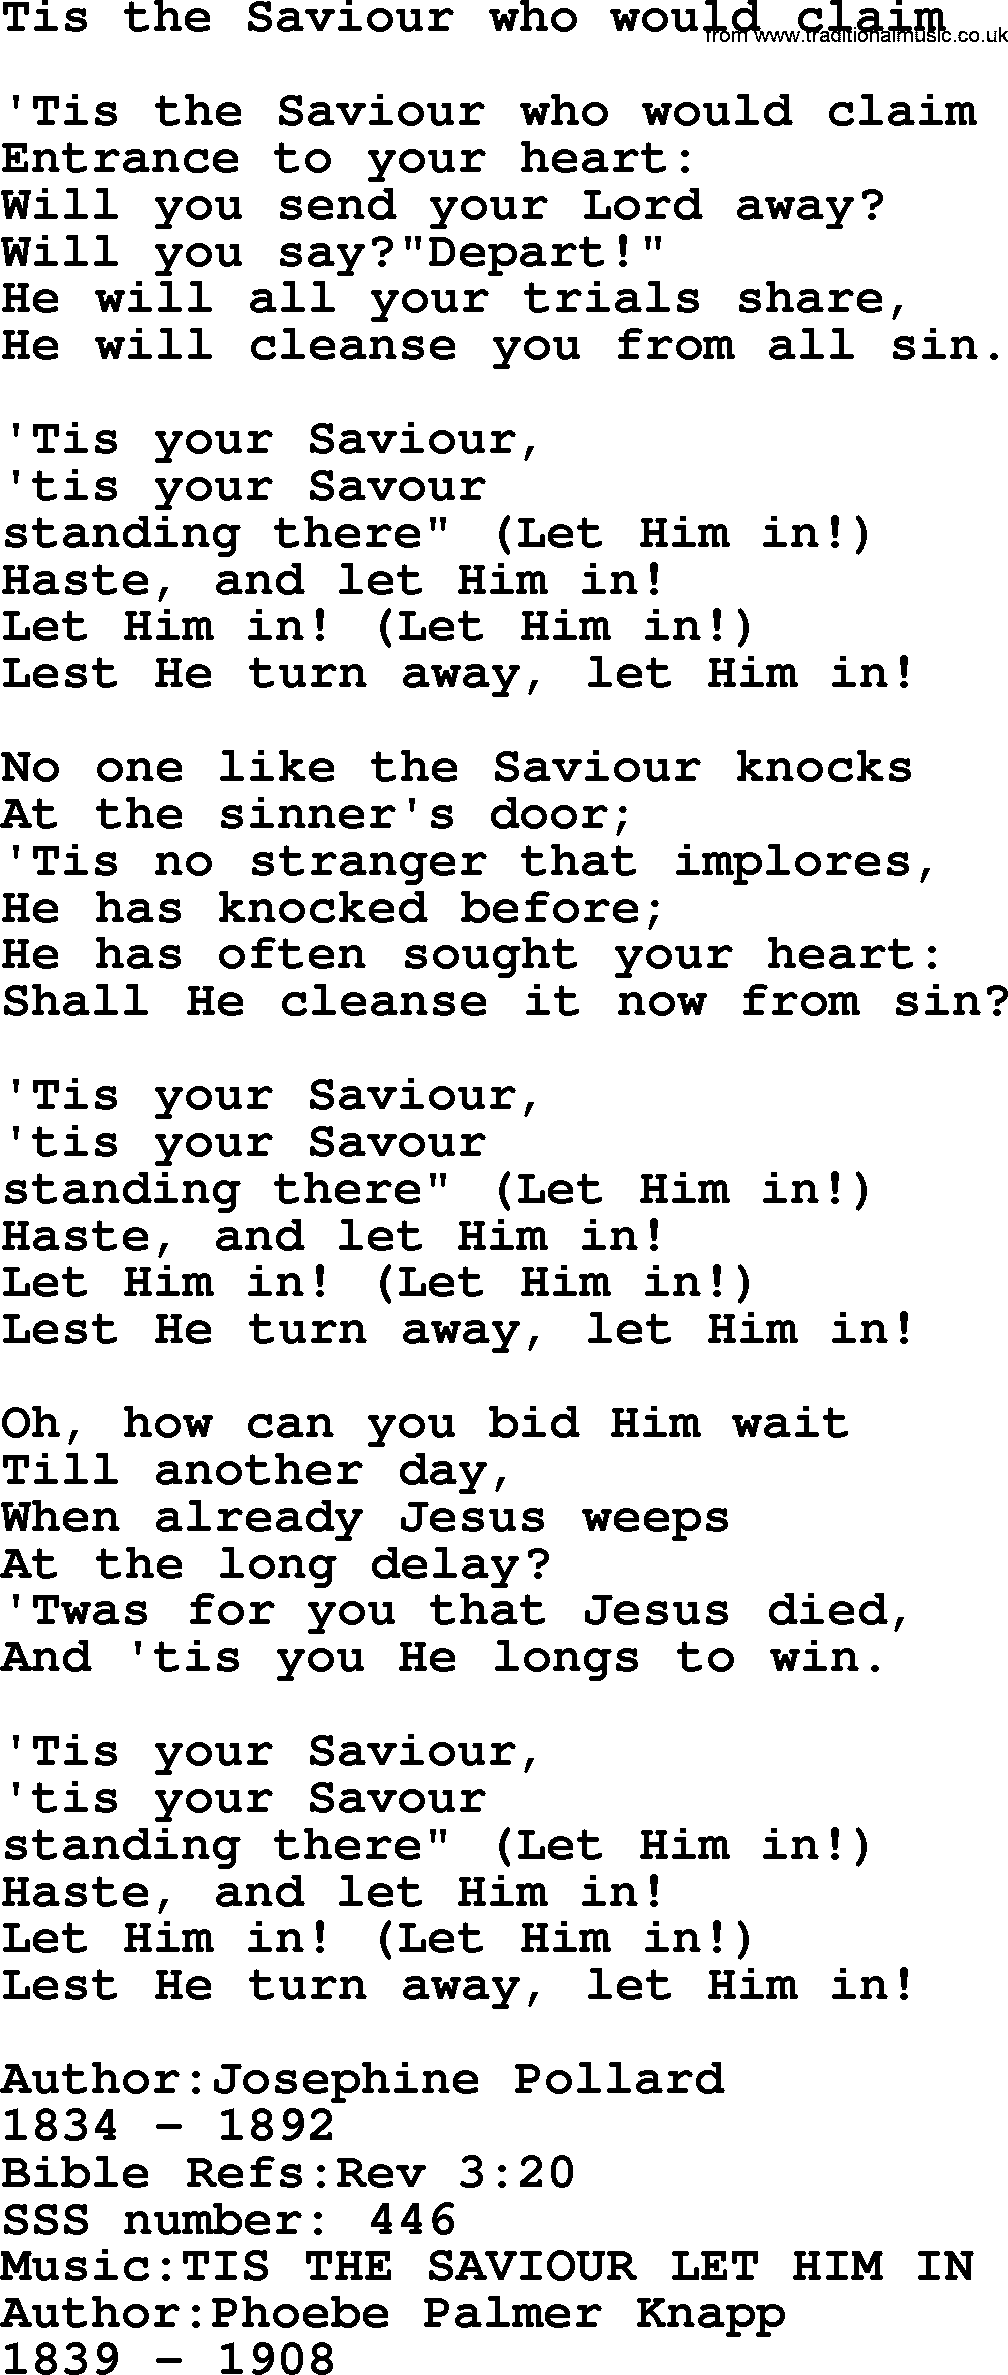 Sacred Songs and Solos complete, 1200 Hymns, title: Tis The Saviour Who Would Claim, lyrics and PDF